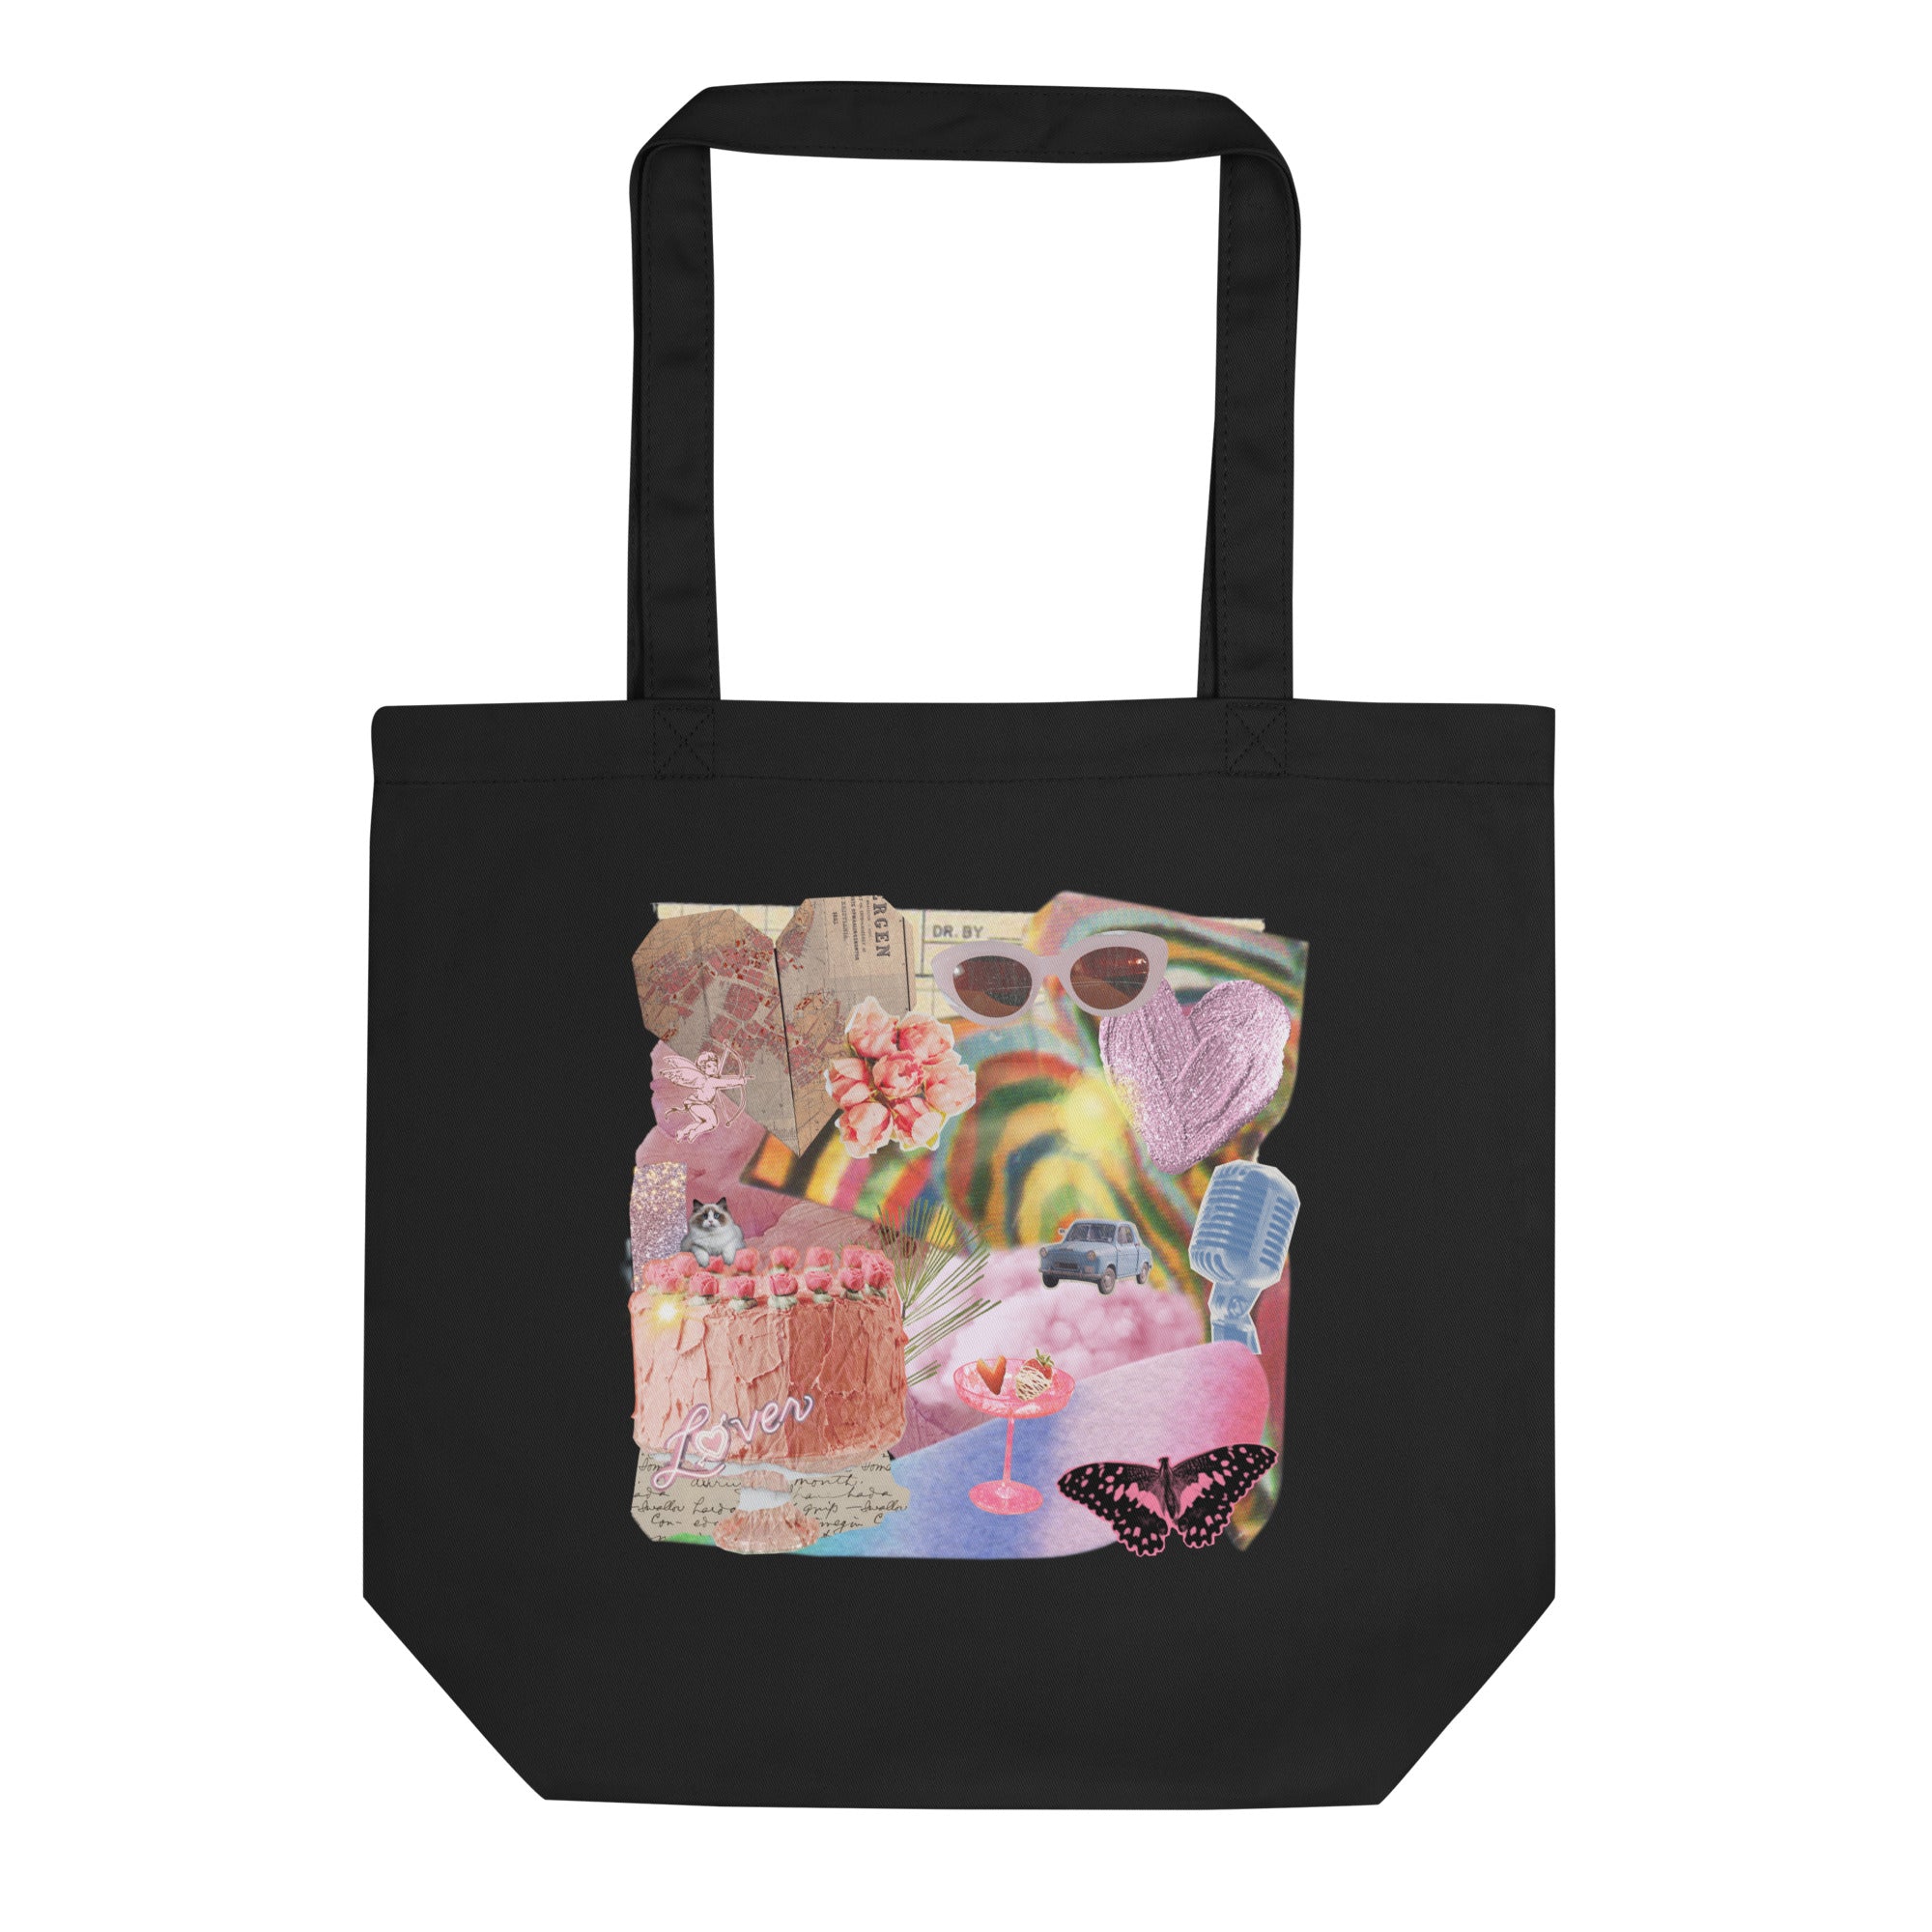 Lover Collage Tote Bag